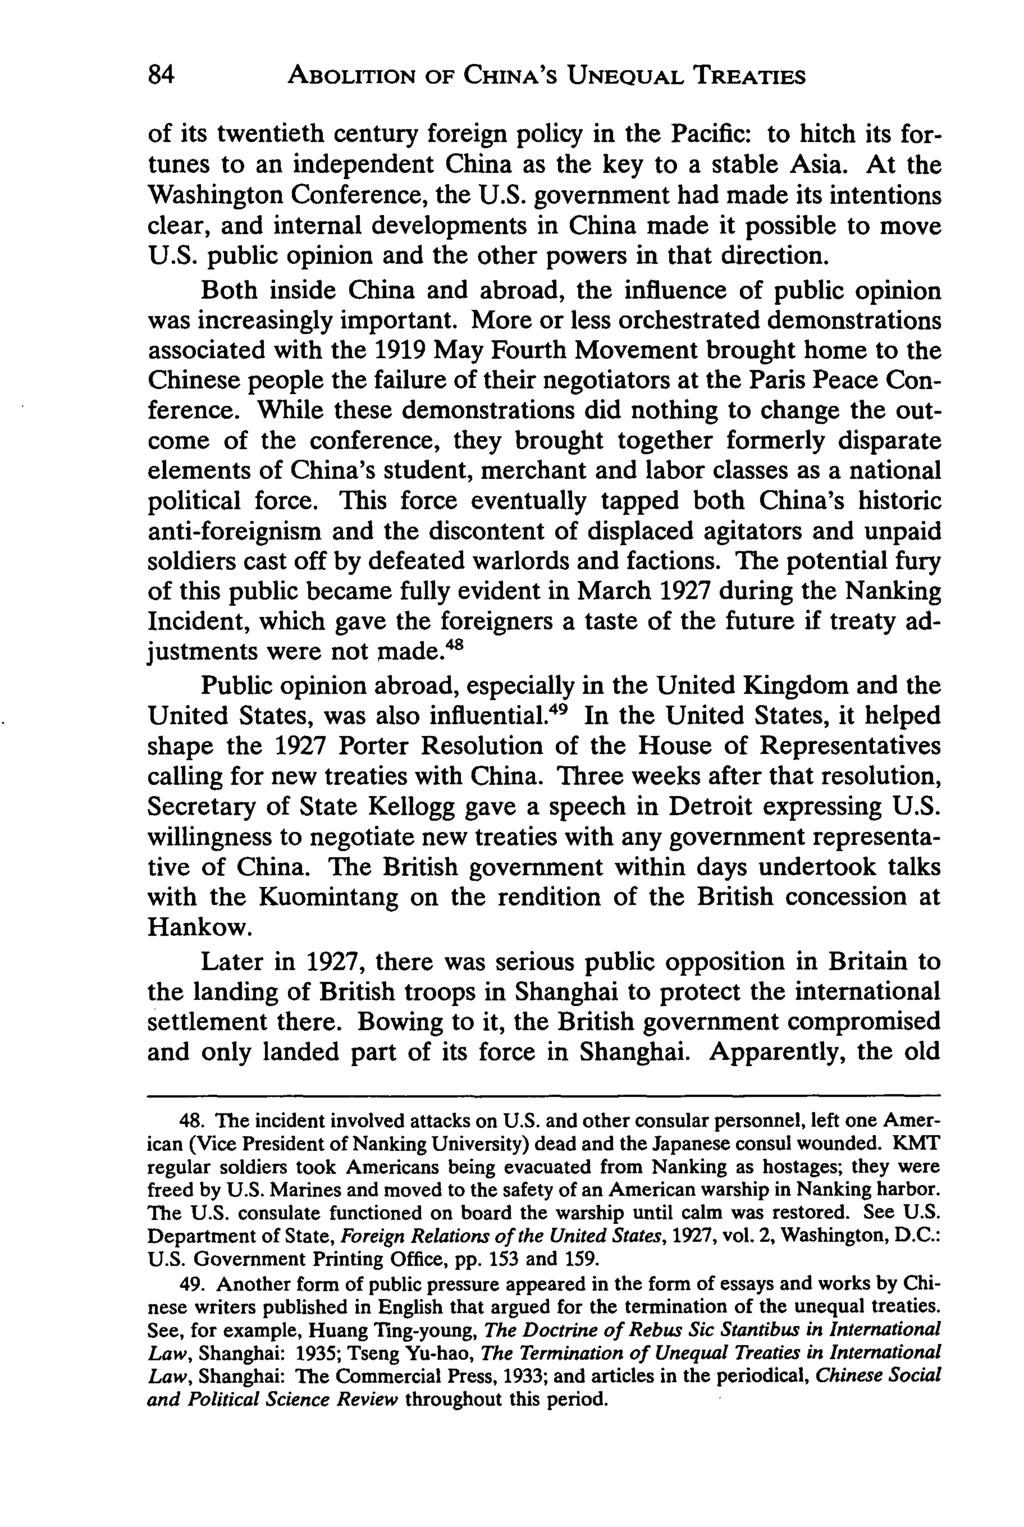 ABOLITION OF CHINA'S UNEQUAL TREATIES of its twentieth century foreign policy in the Pacific: to hitch its fortunes to an independent China as the key to a stable Asia.